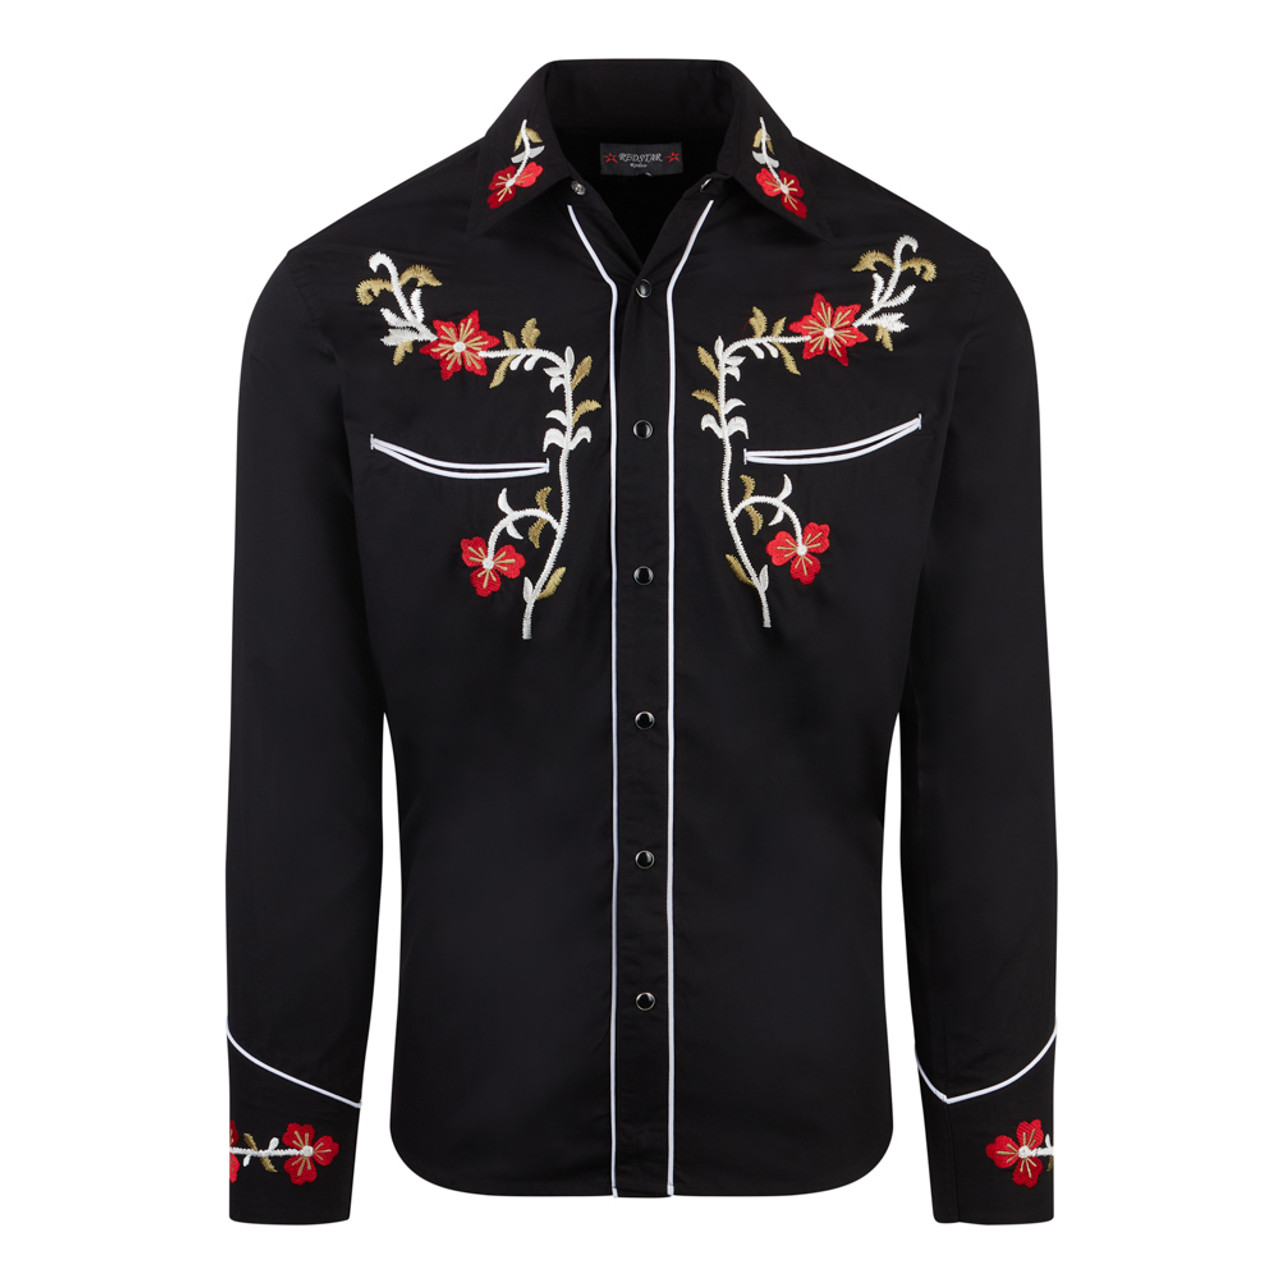 Men's Red Star Rodeo Cowboy Rockabilly Line Dancing Western Embroidered Shirt